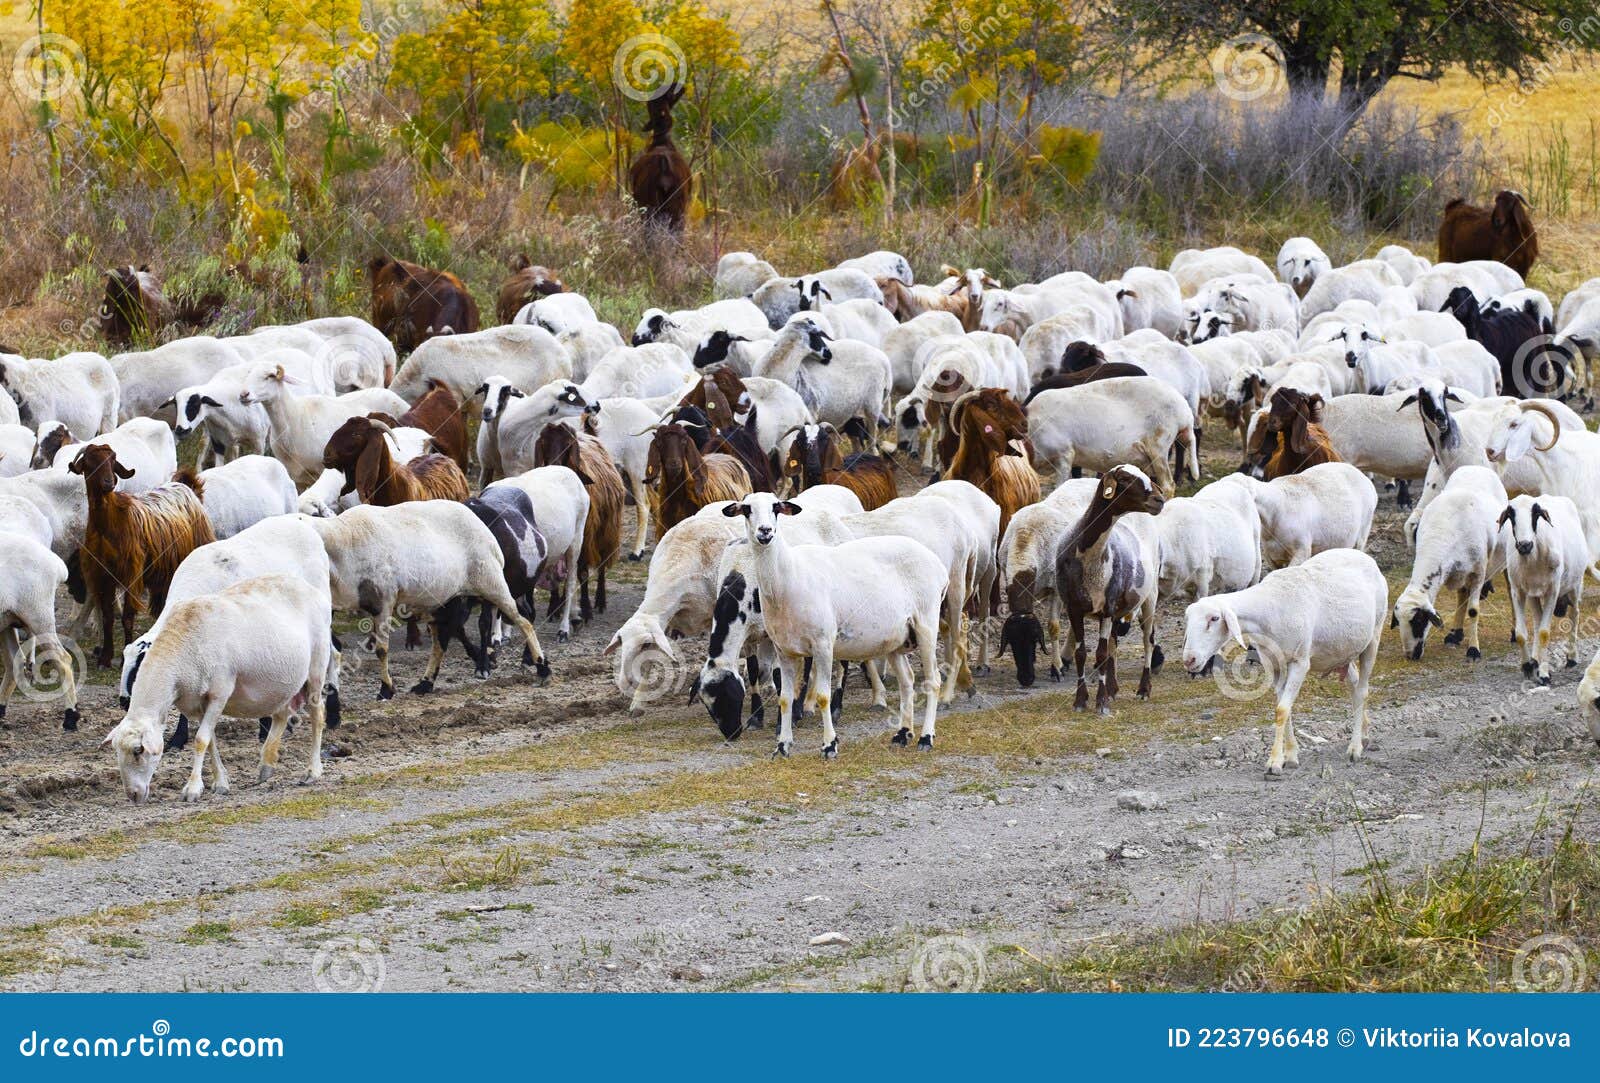 Goats Walk in Village, Breeding of Domestic Animals. Industrial Animal  Husbandry, Livestock Business Concept, Farm with Animals, Stock Photo -  Image of sniff, goat: 223796648